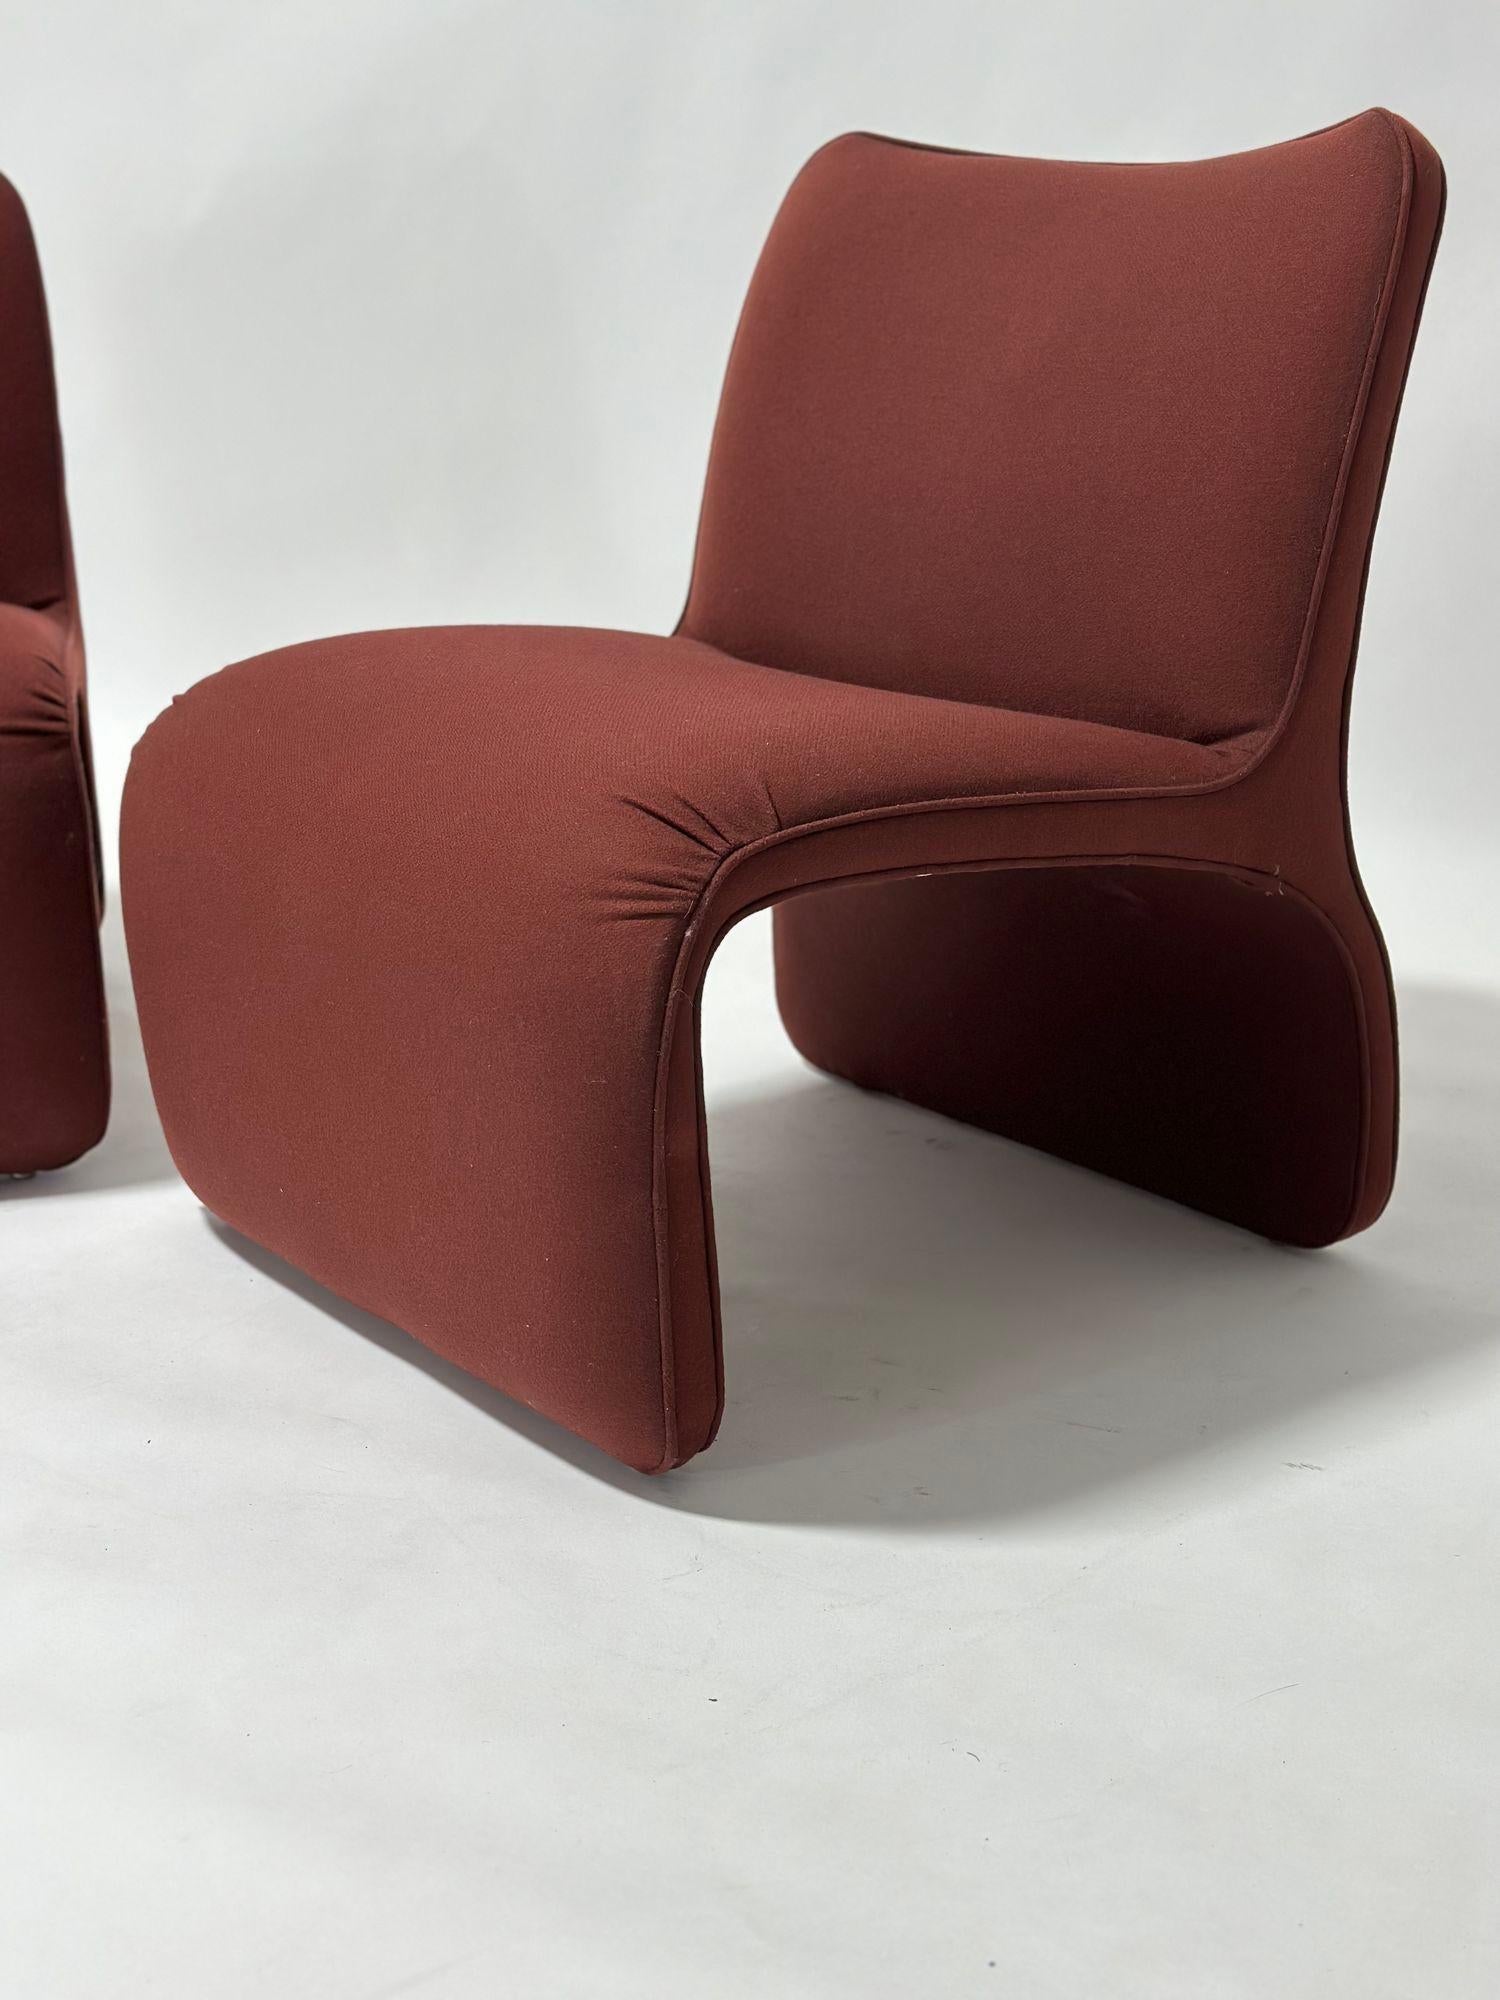 Late 20th Century Sculptural Slipper Lounge Chairs for Preview, 1990